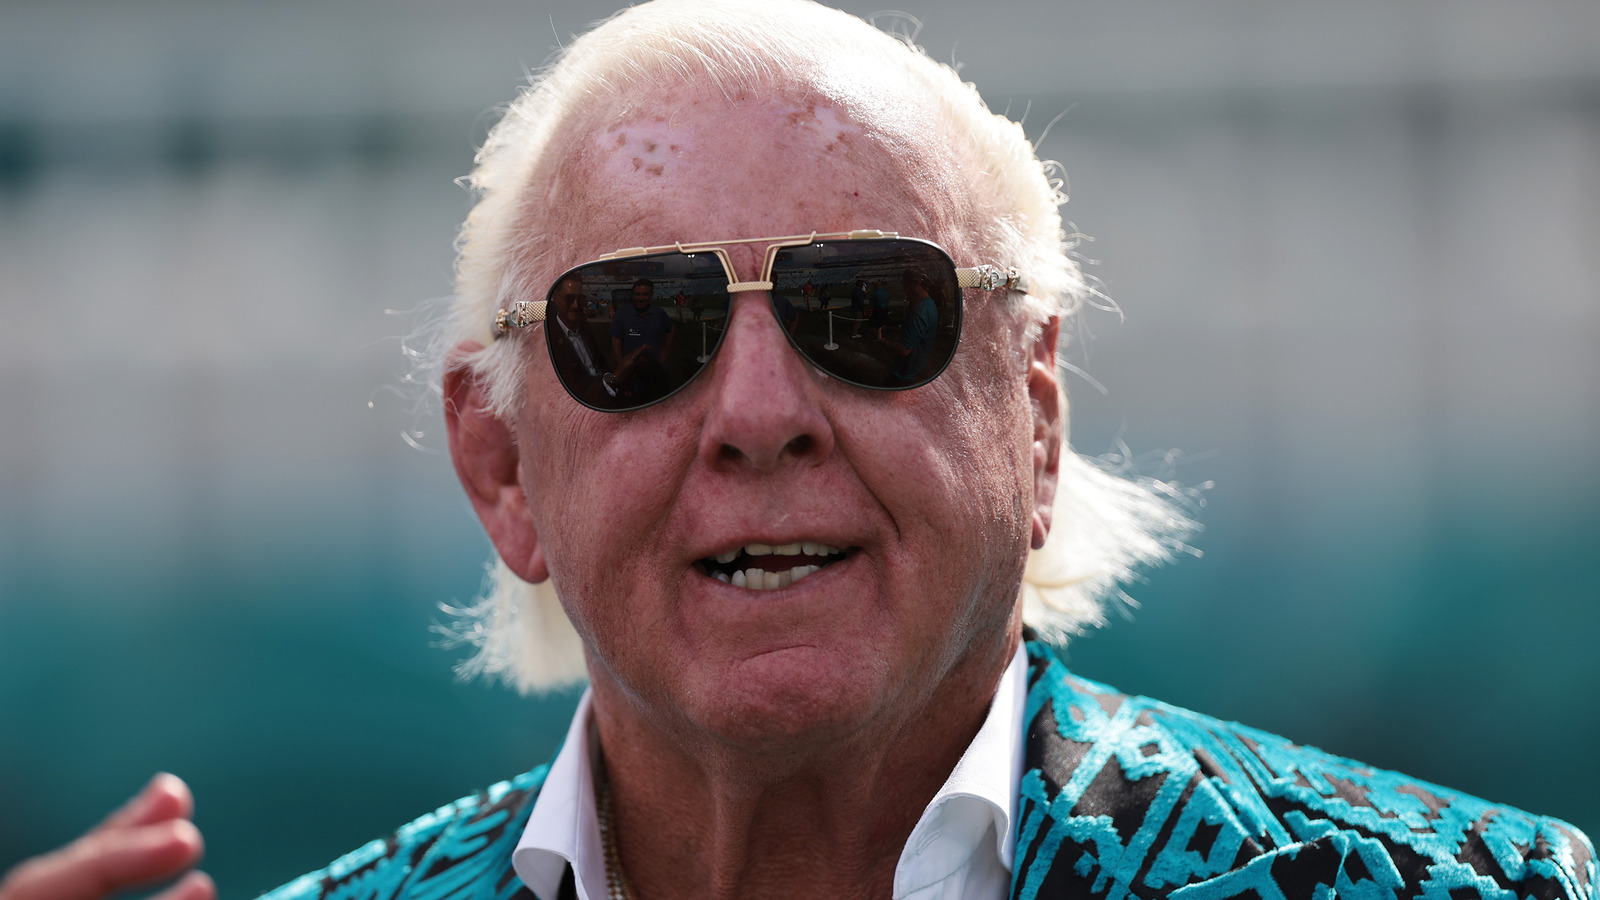 Ric Flair Puts WWE On Blast Following 'Worst Professional Move I've Ever Seen'